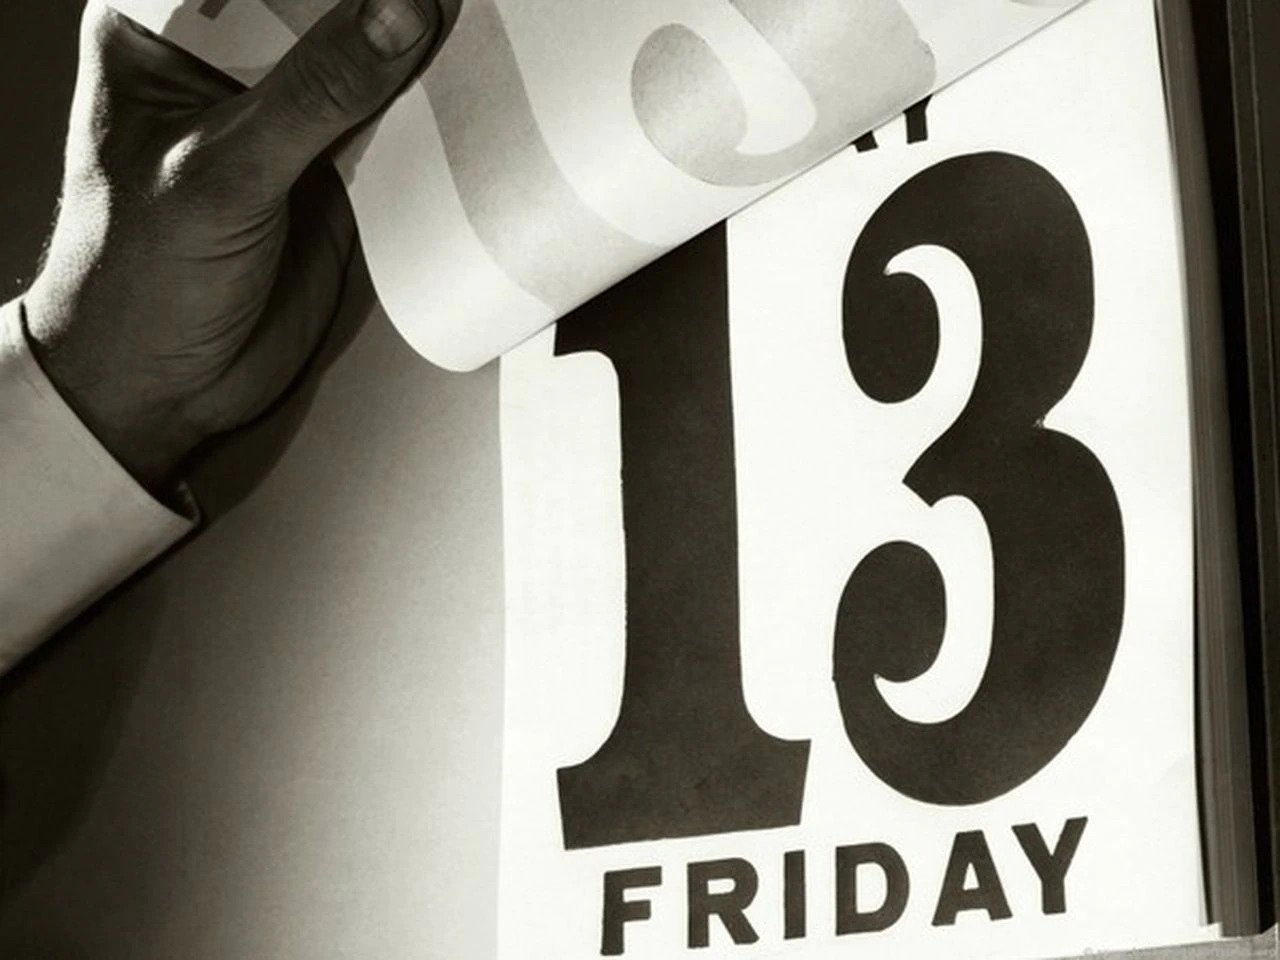 Friday the 13th: Its Origins and Why It Scares People